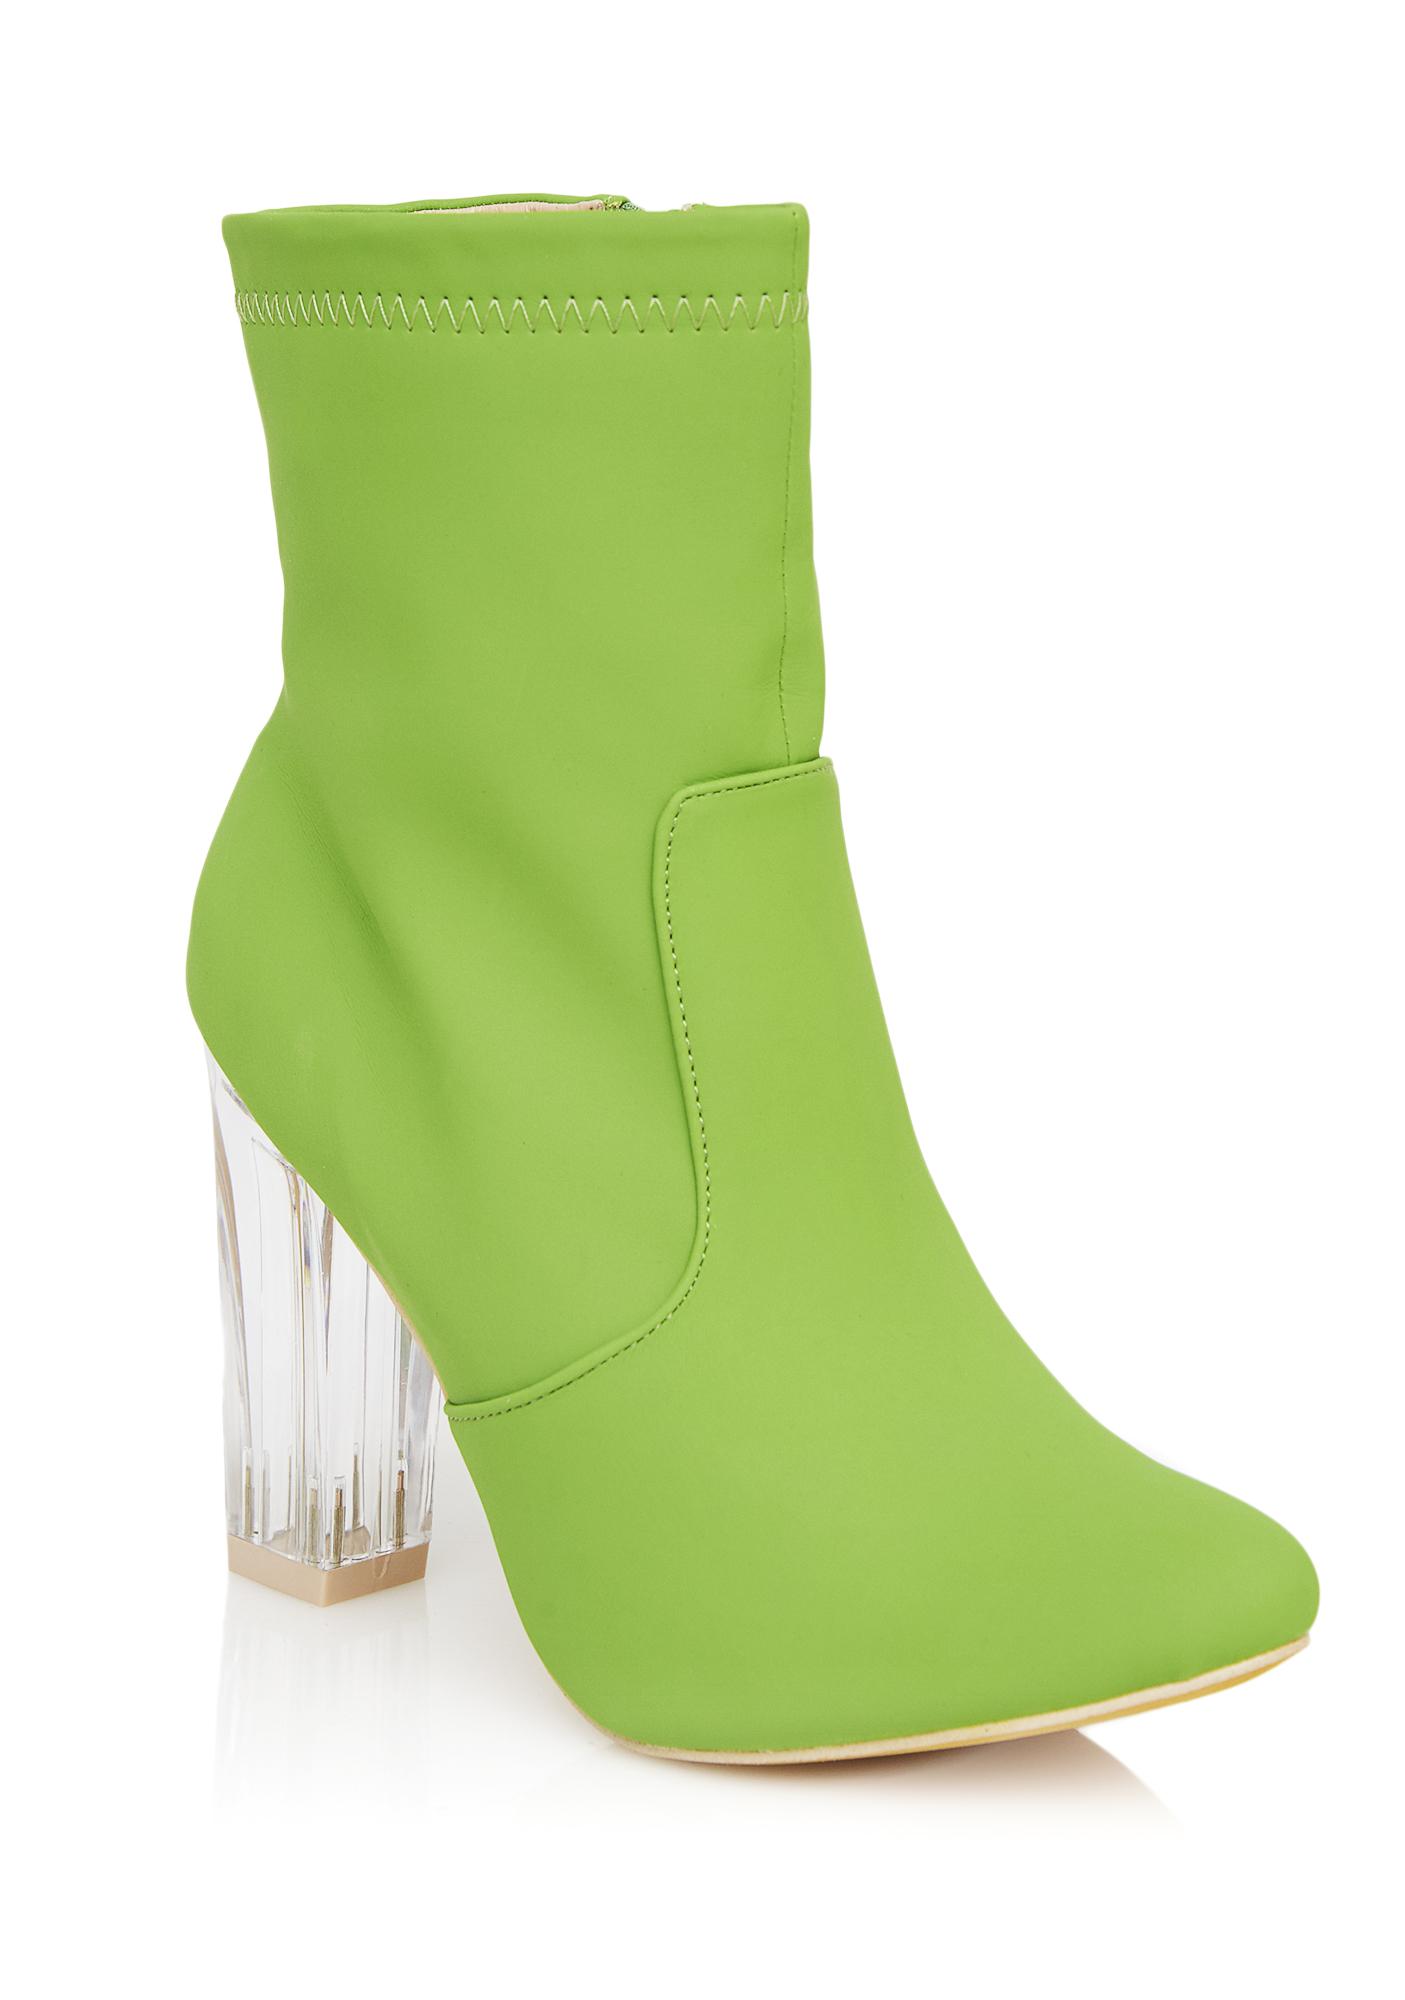 Ankle Boots Lucite Heel Lime Green 